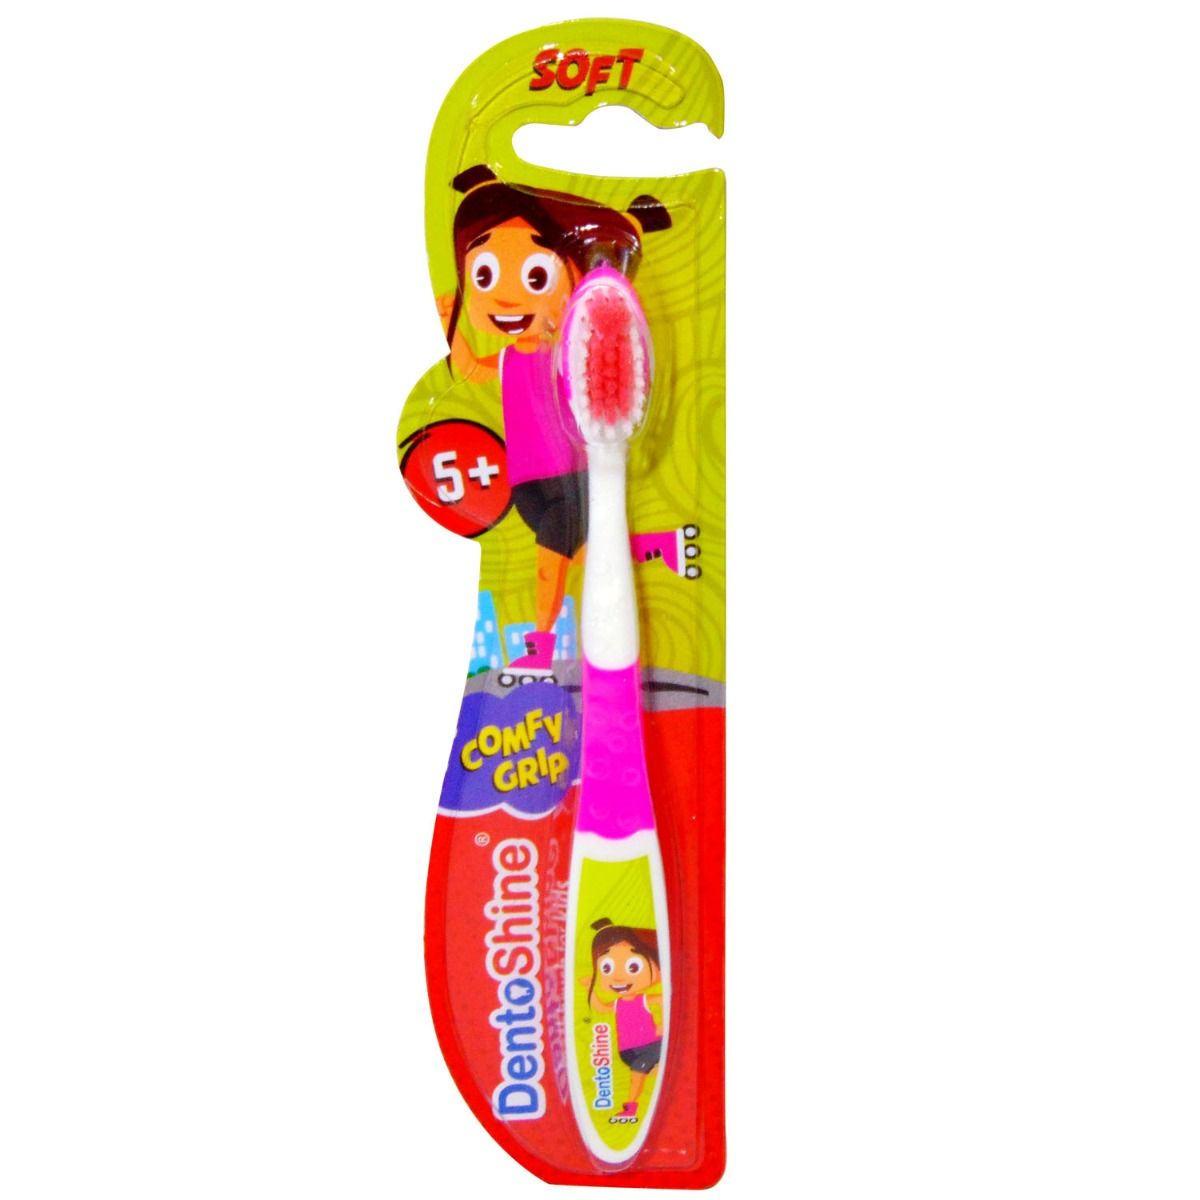 Buy Dentoshine Comfy Grip Kids Toothbrush 5+ Years, 1 Count Online